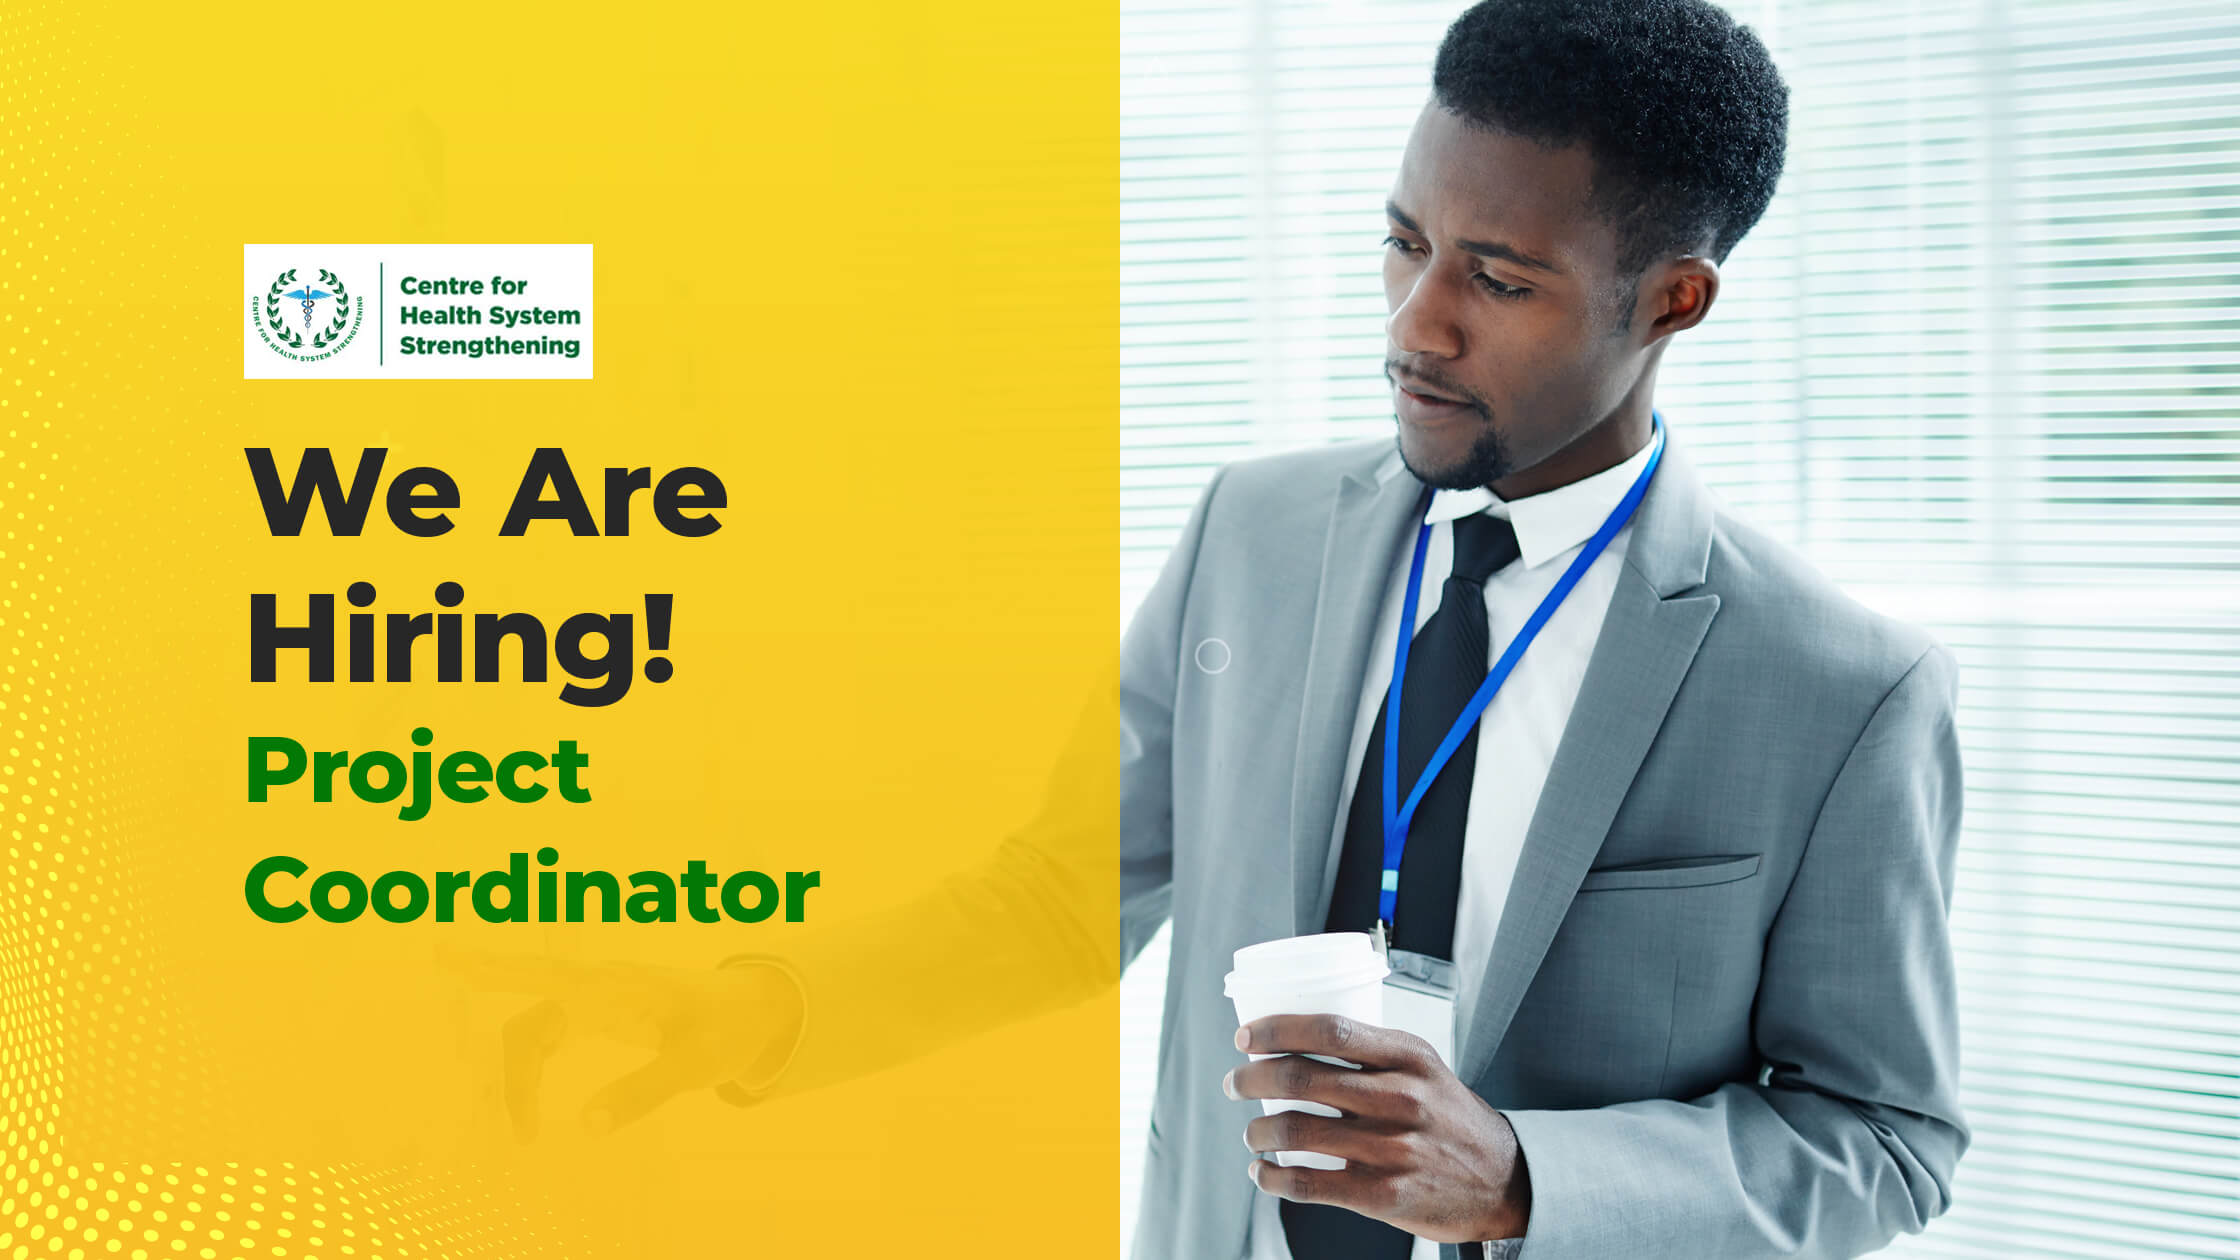 We are Hiring! Project Coordinator